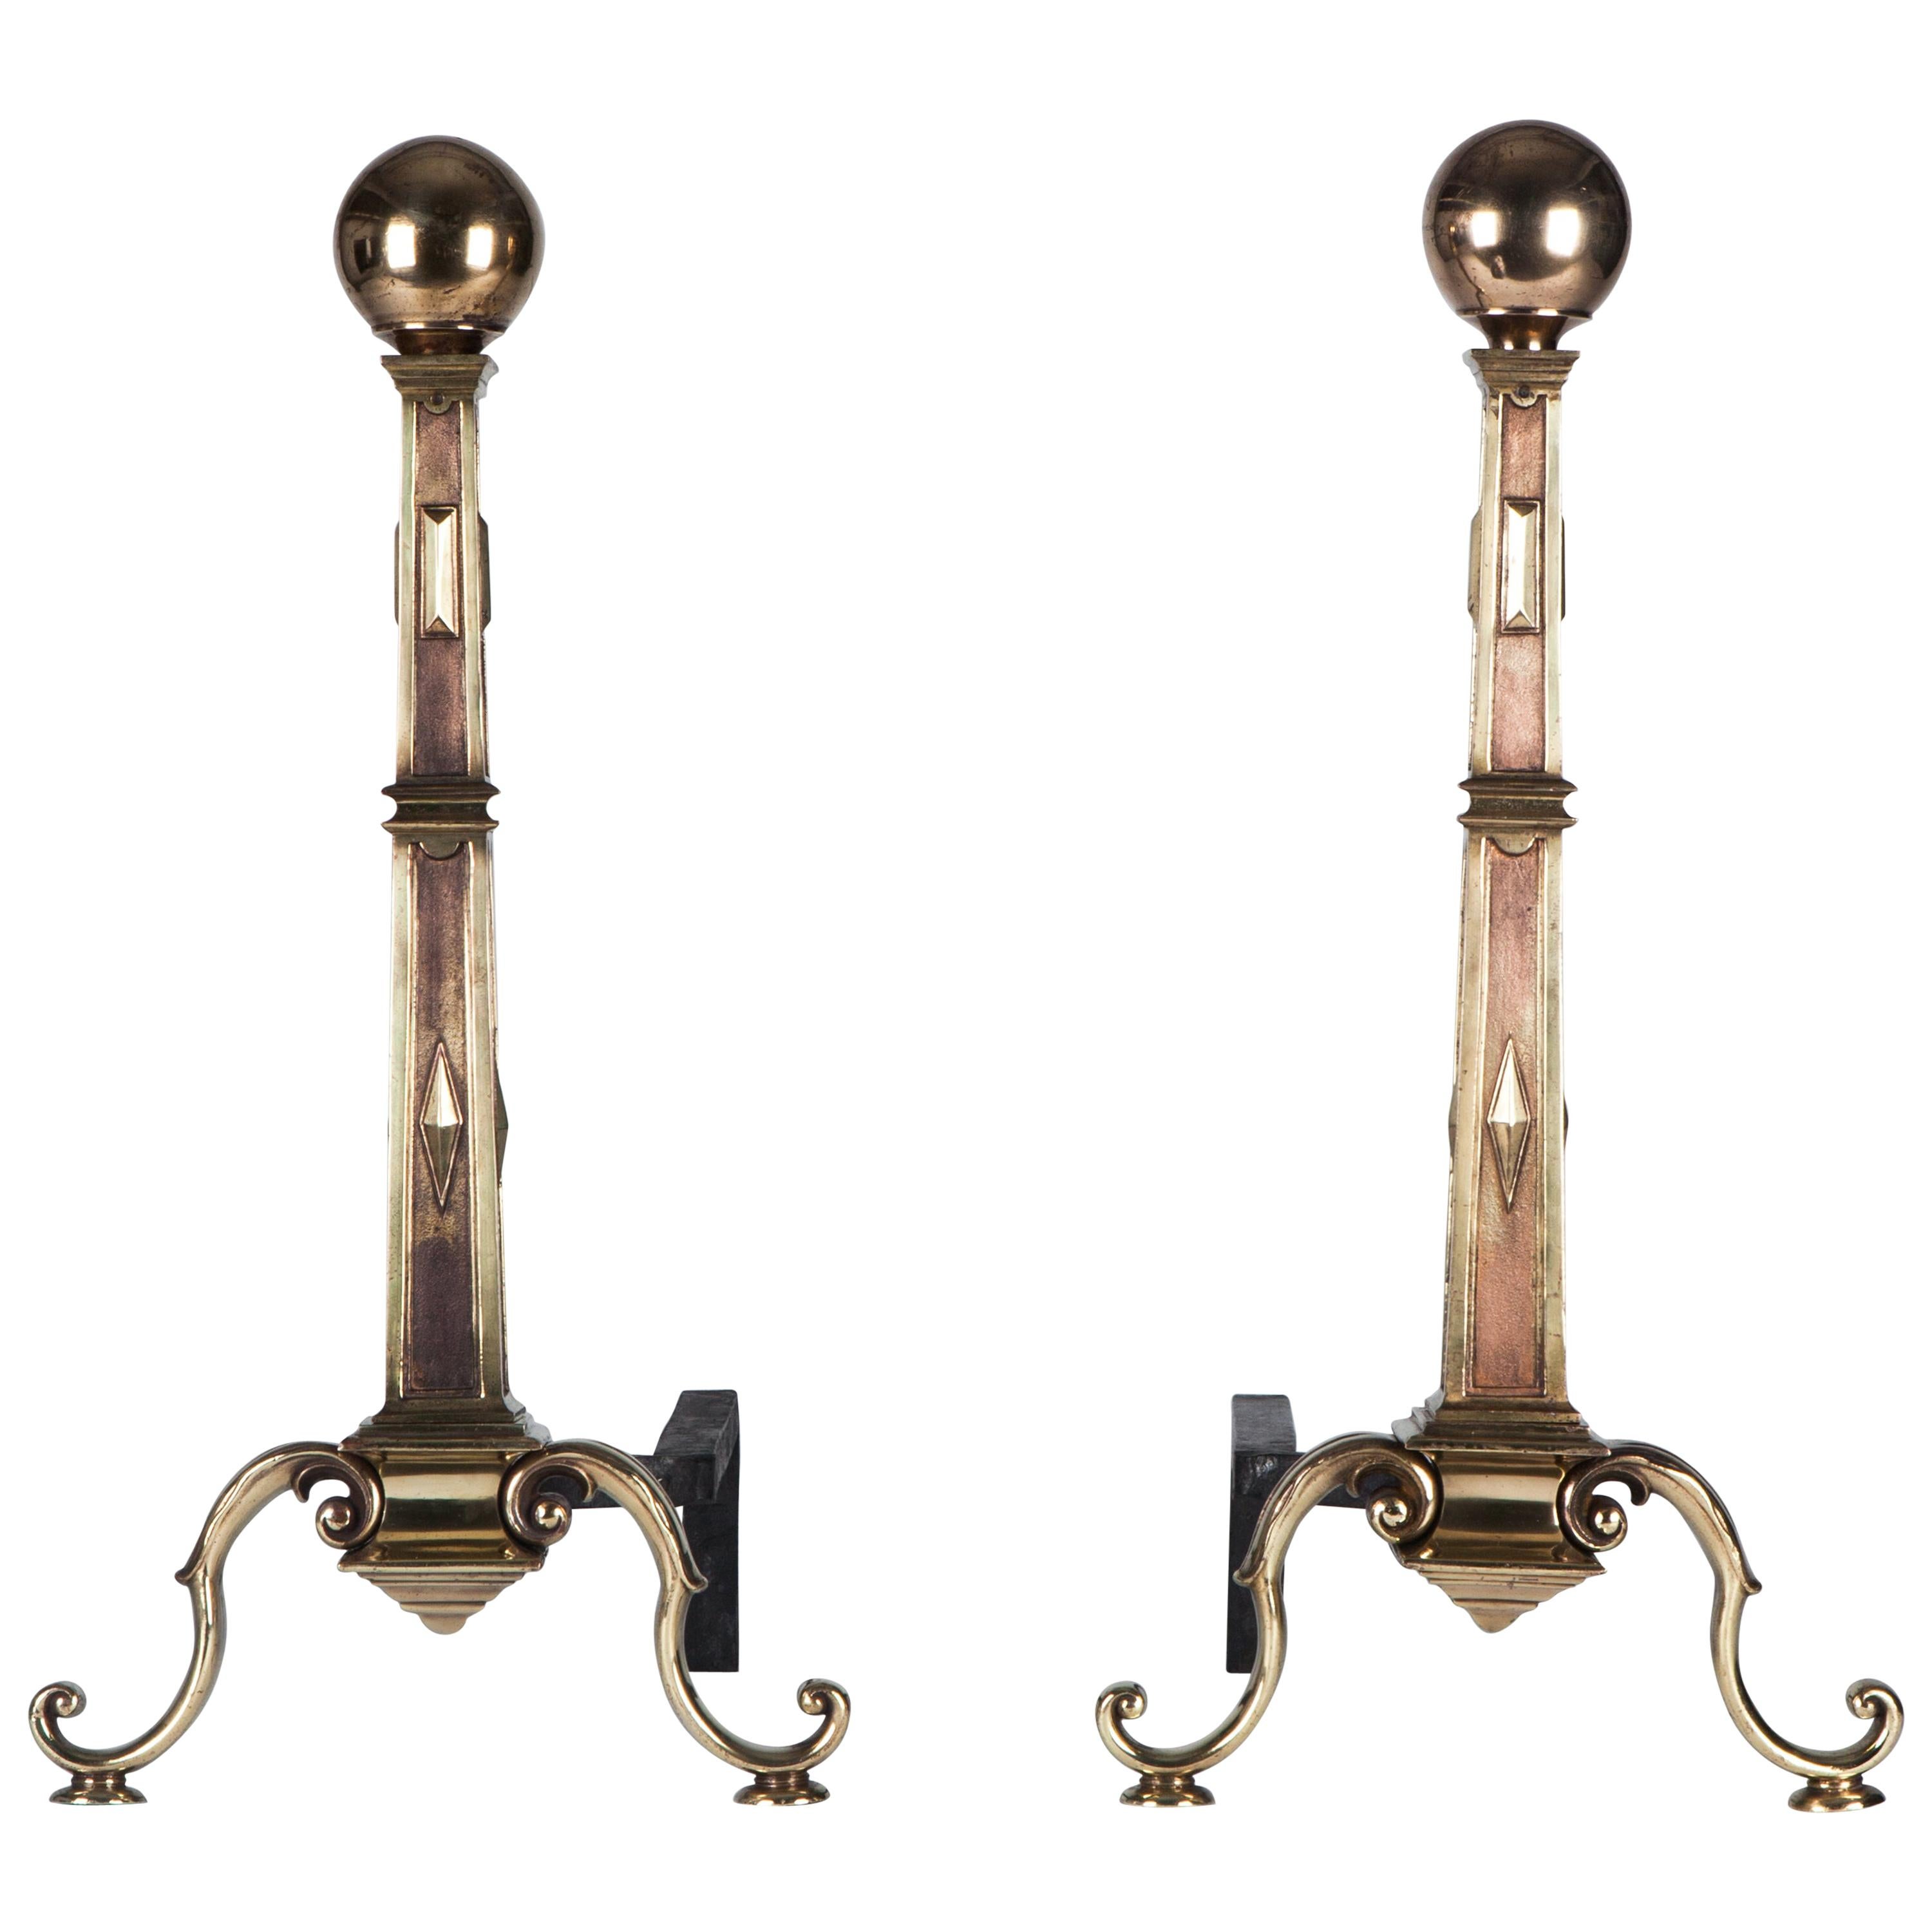 Cast Bronze Andirons with Tapered Square Columns and Ball Finials, Circa 1920s